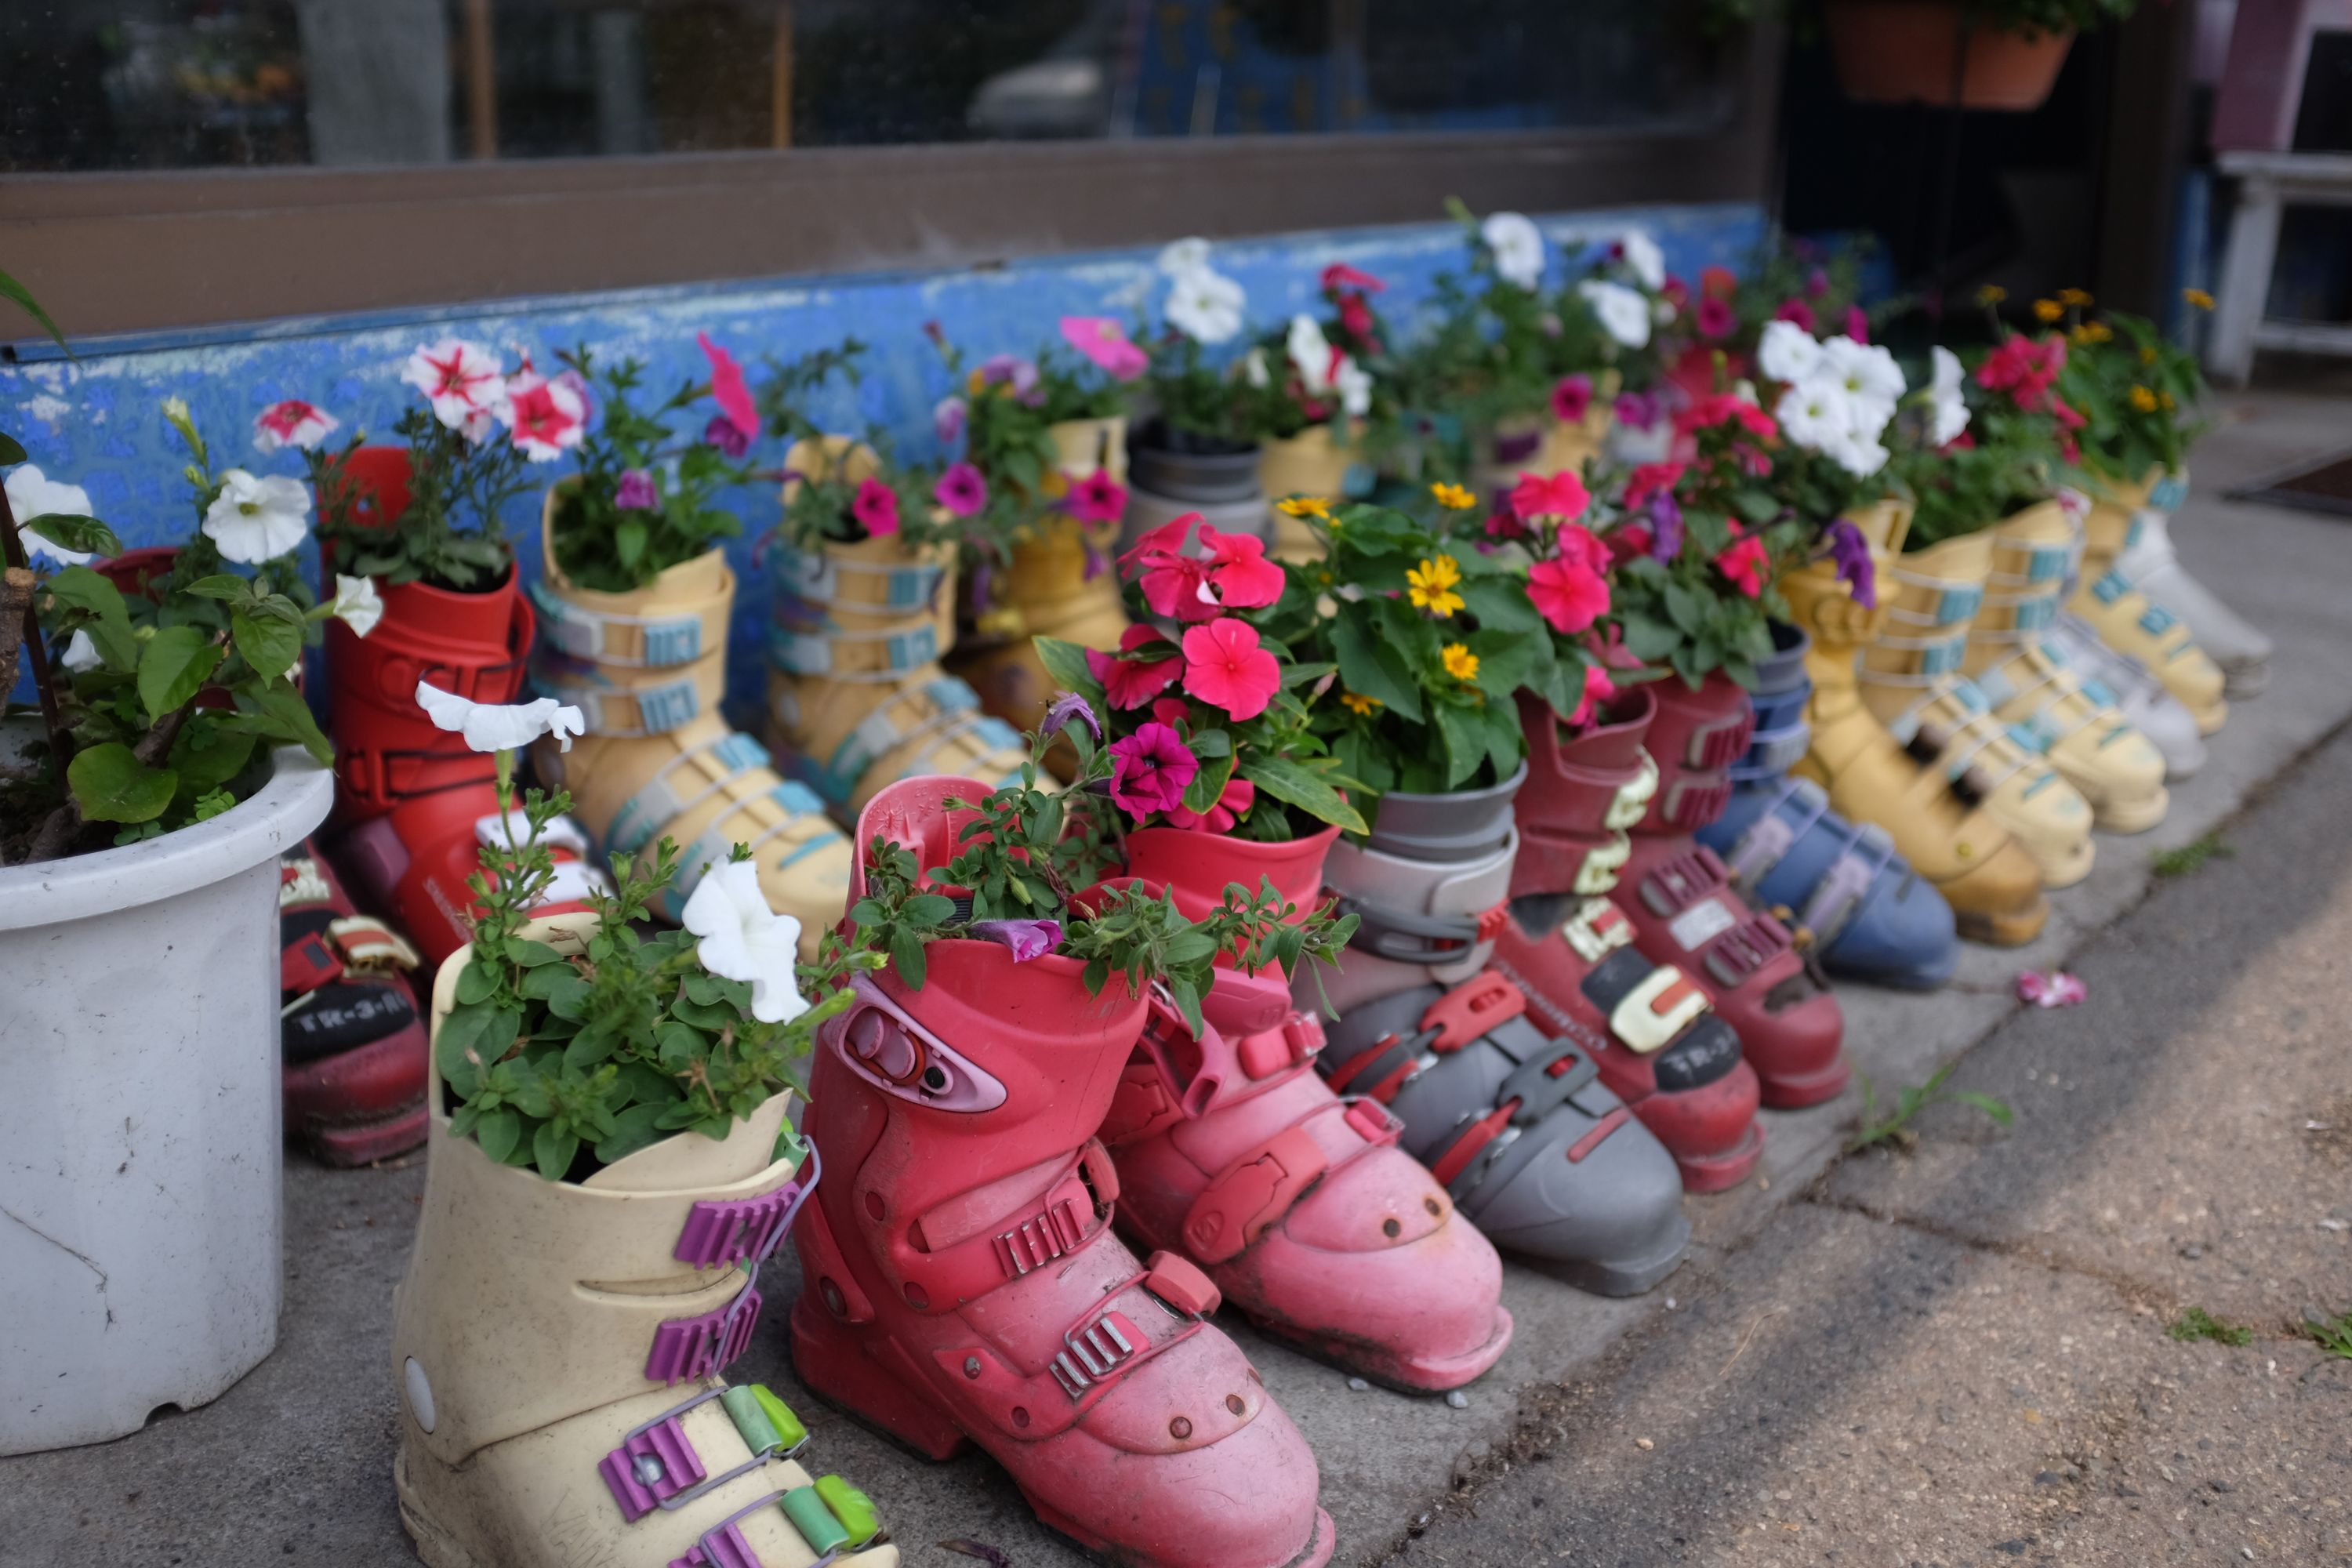 A row of colorful ski boots turned into flower pots.